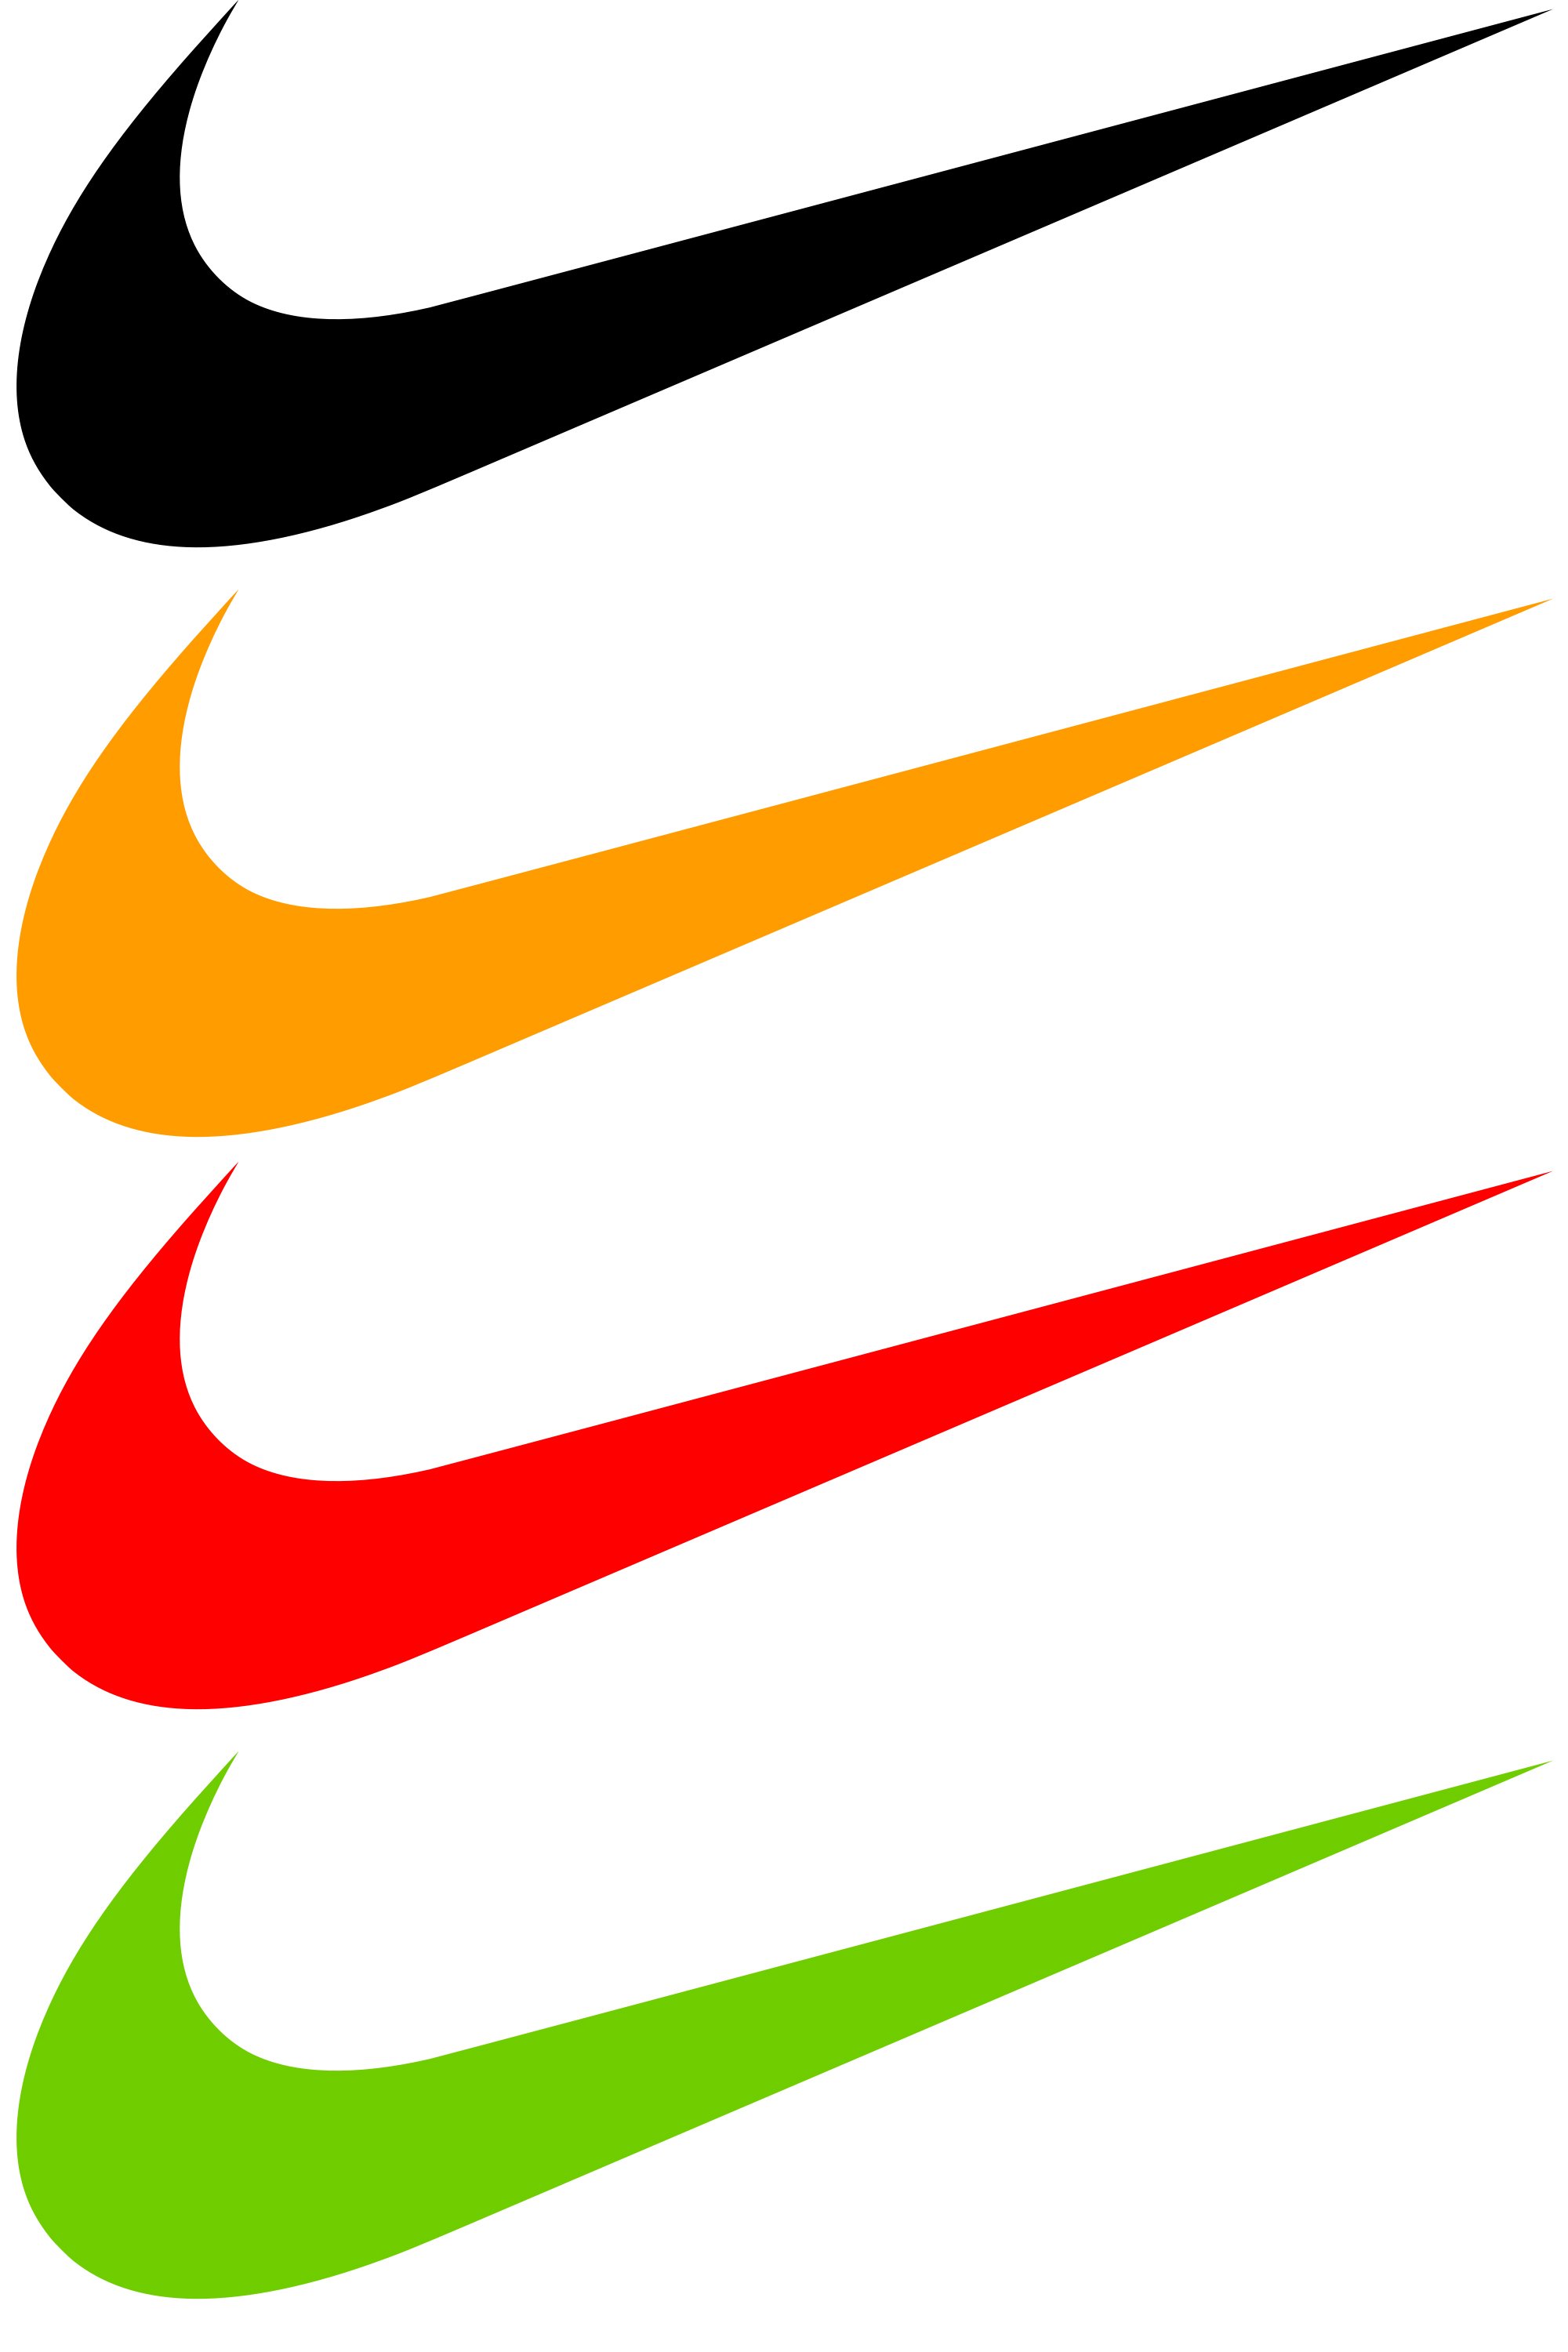 Nike Logo, Nike Symbol Meaning, History and Evolution
